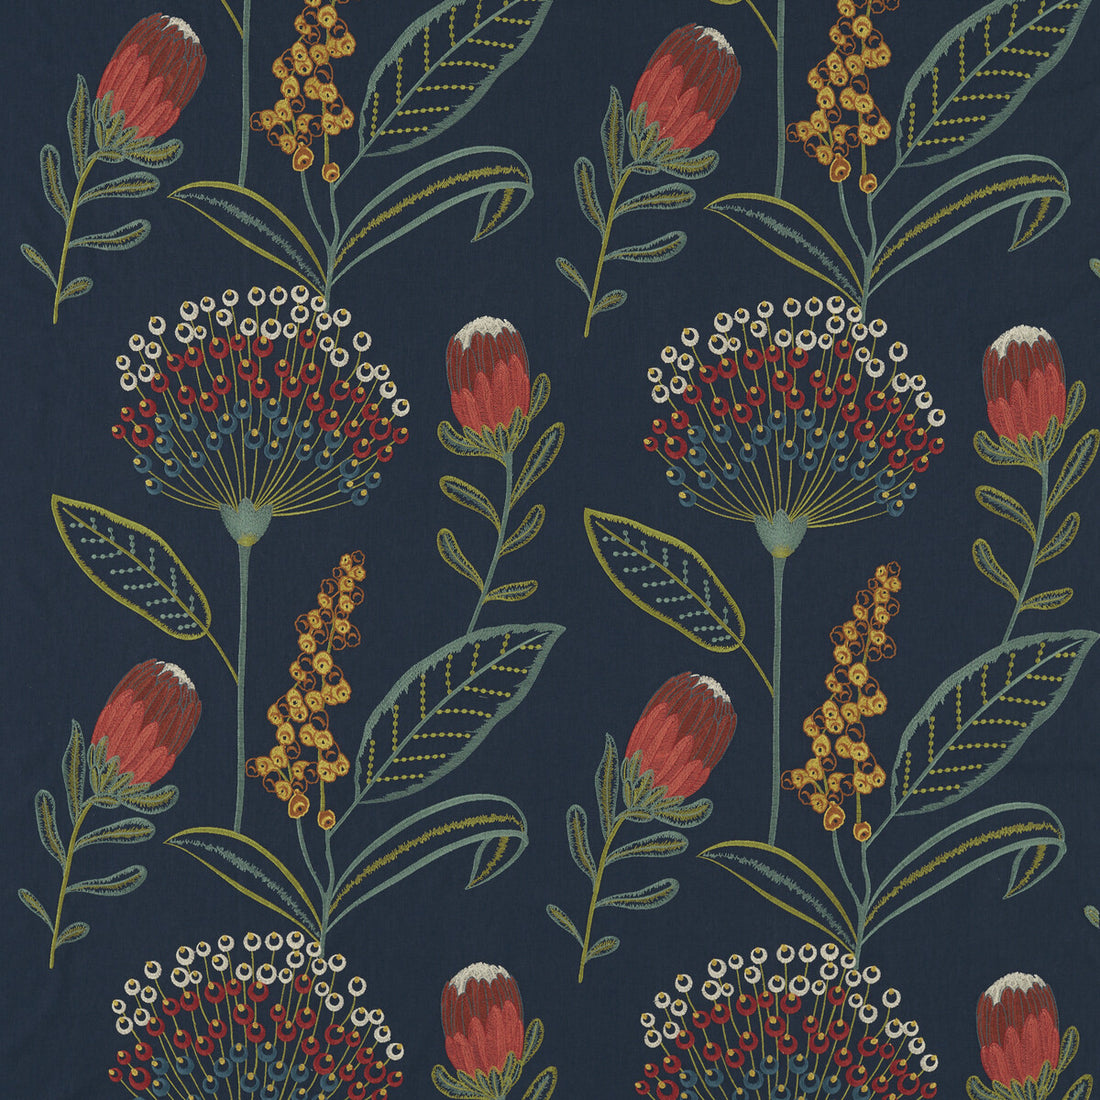 Protini fabric in midnight color - pattern F1715/02.CAC.0 - by Clarke And Clarke in the Breegan Jane Fabrics collection